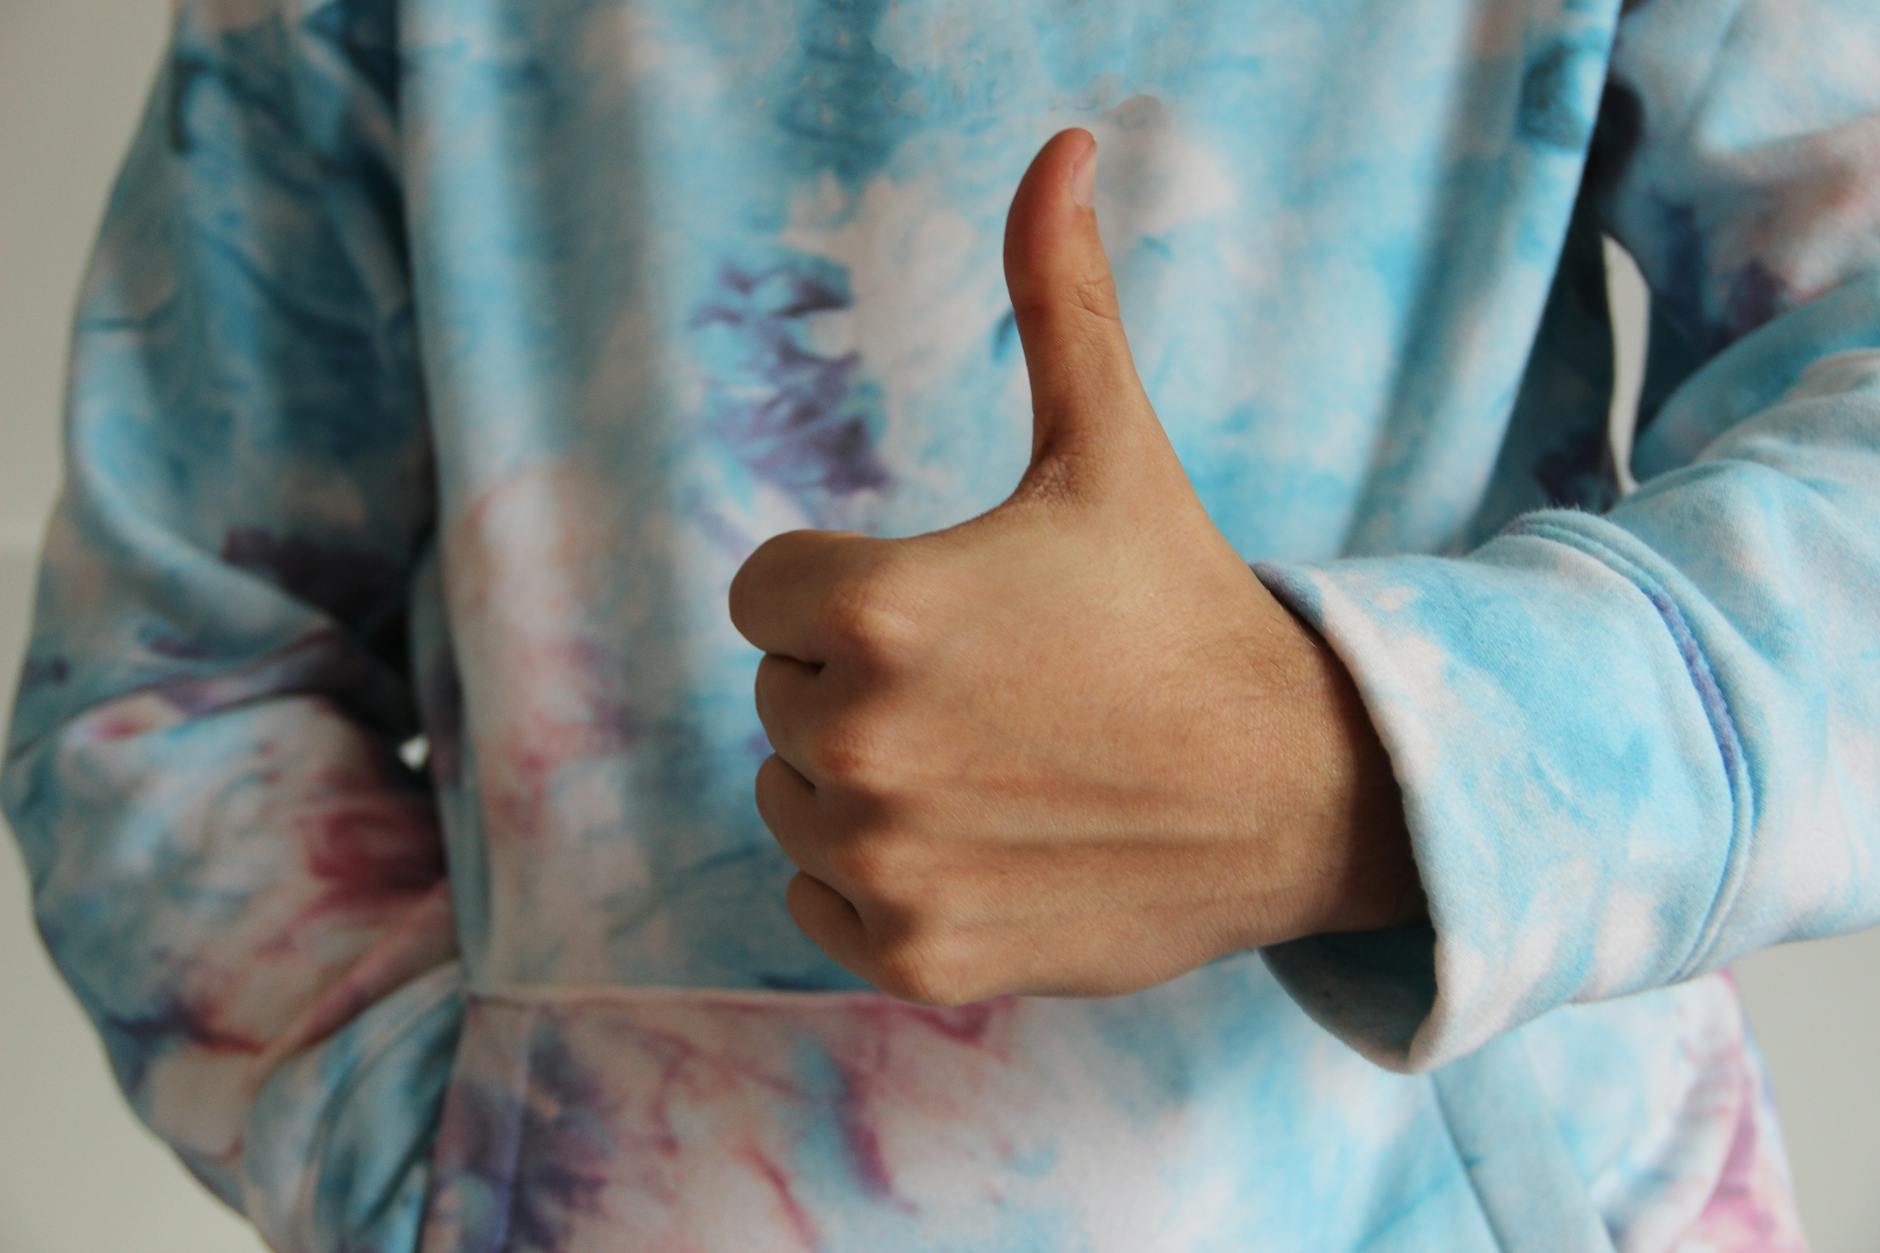 A person in a tie dye sweater is giving a thumbs up sign with one hand.